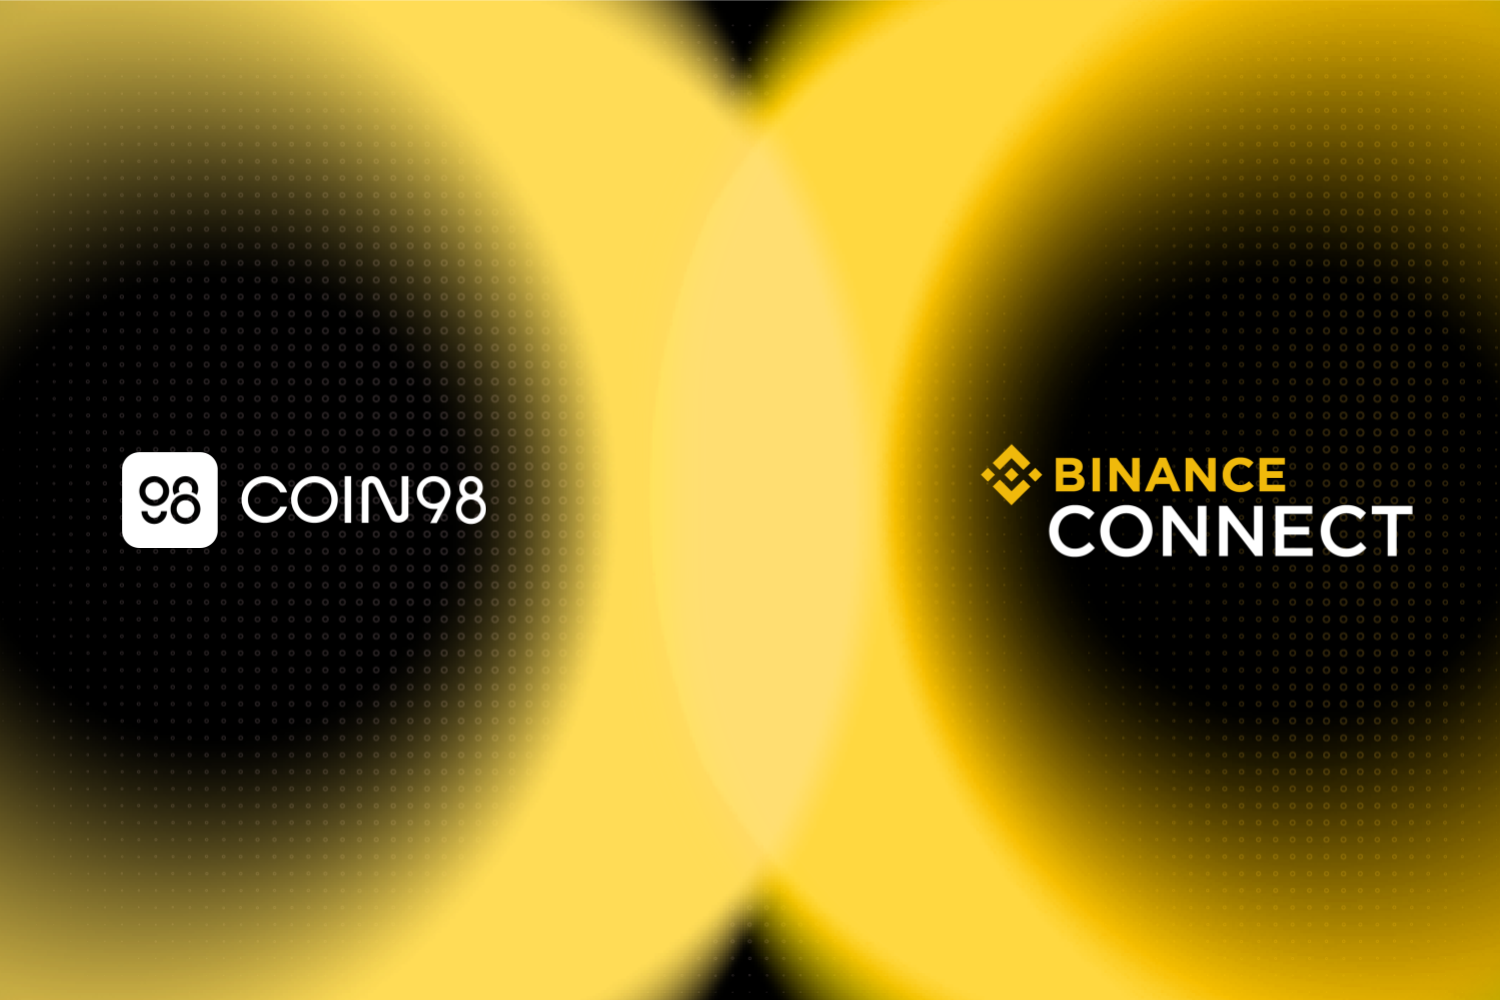 Coin98 integrates Binance Connect 